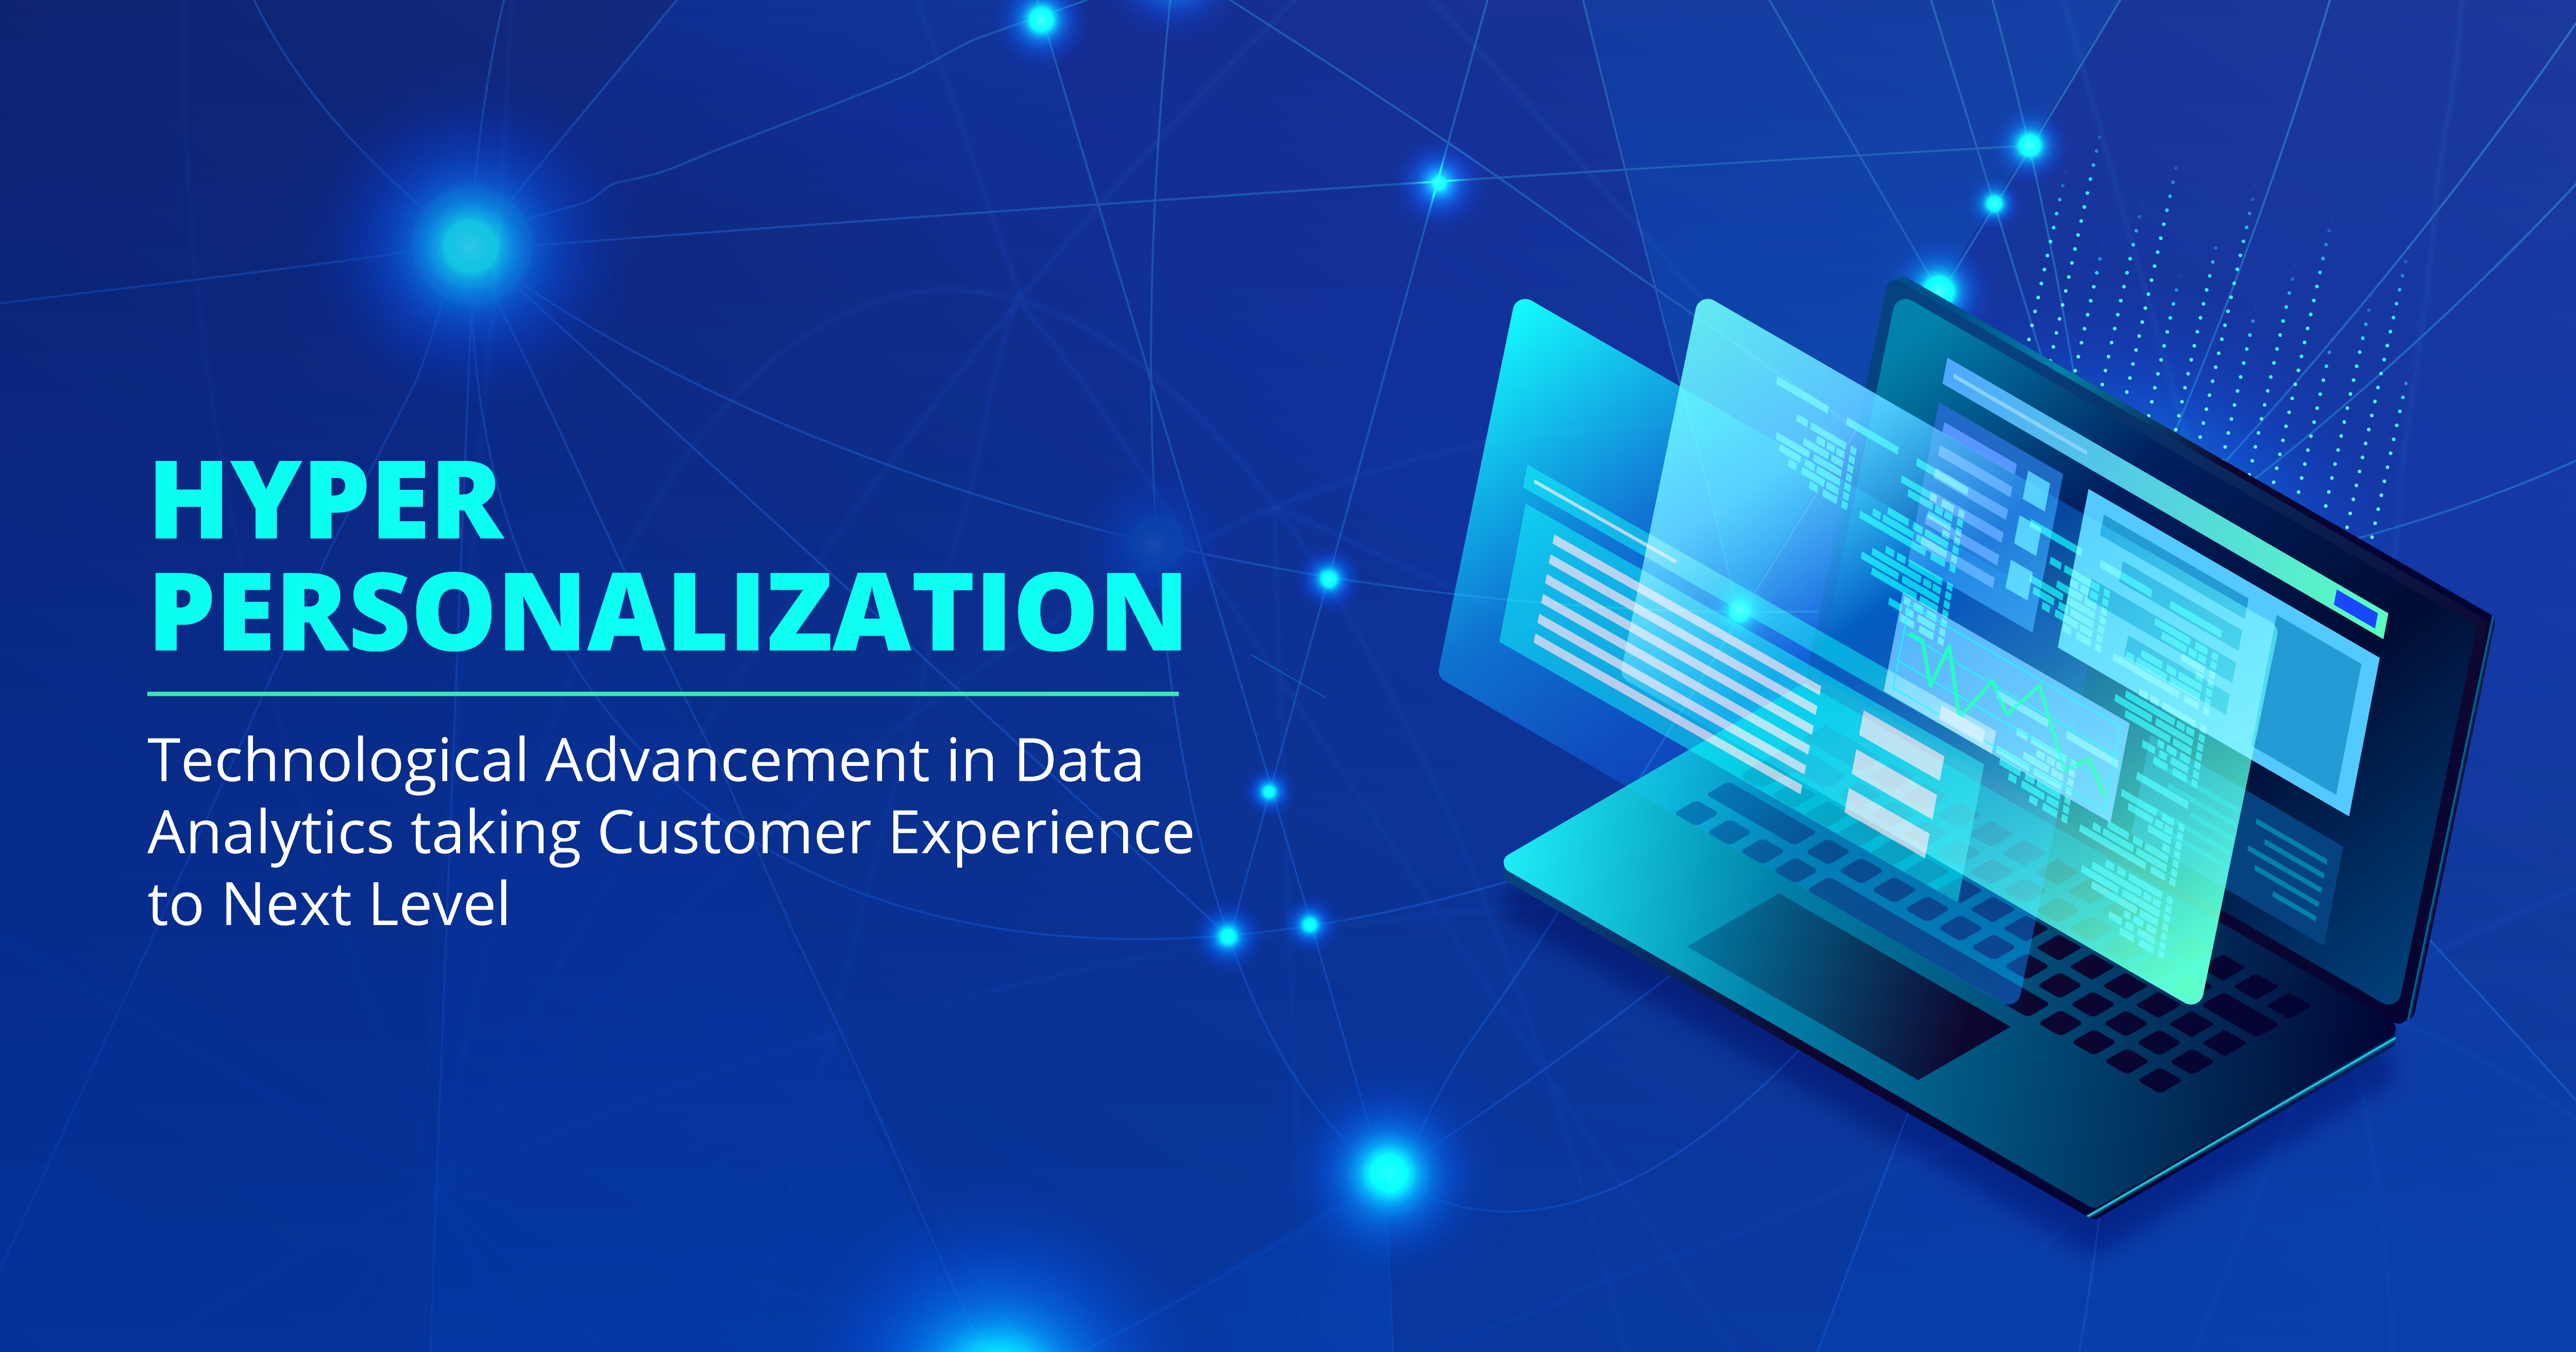 Hyper-Personalization: Technological Advancement in Data Analytics taking Customer Experience to Next Level